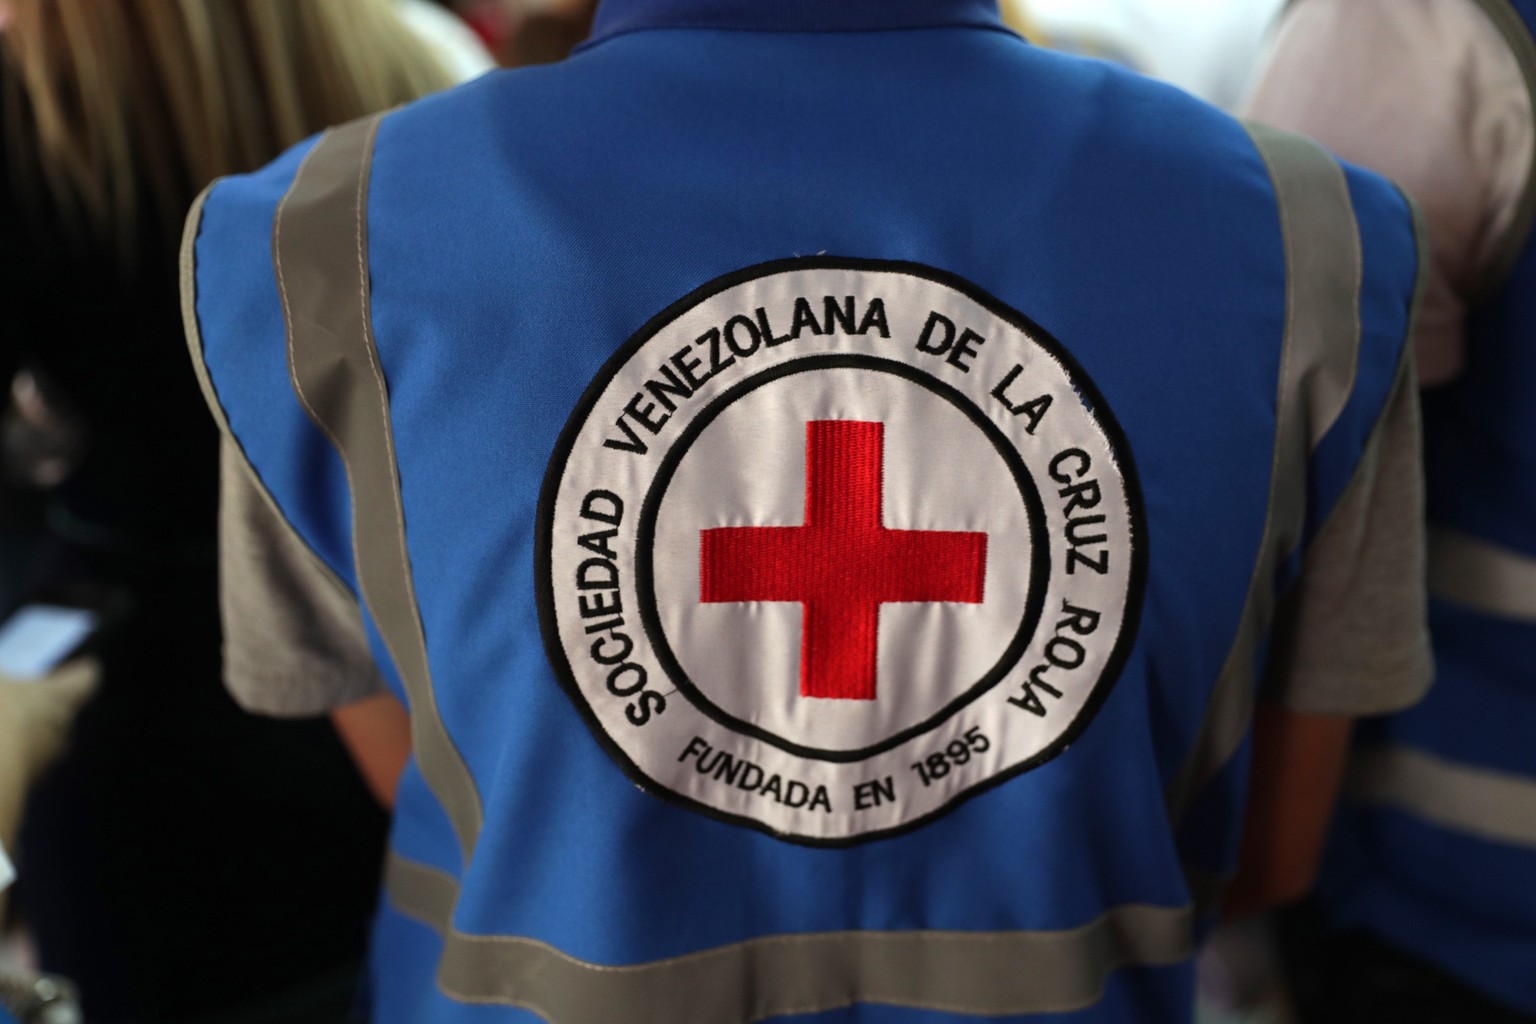 epa07471568 A person wears a vest of the Venezuelan Red Cross during a press conference of the president of the International Federation of Red Cross and Red Crescent Societies (IFRC) Francesco Rocca  ...